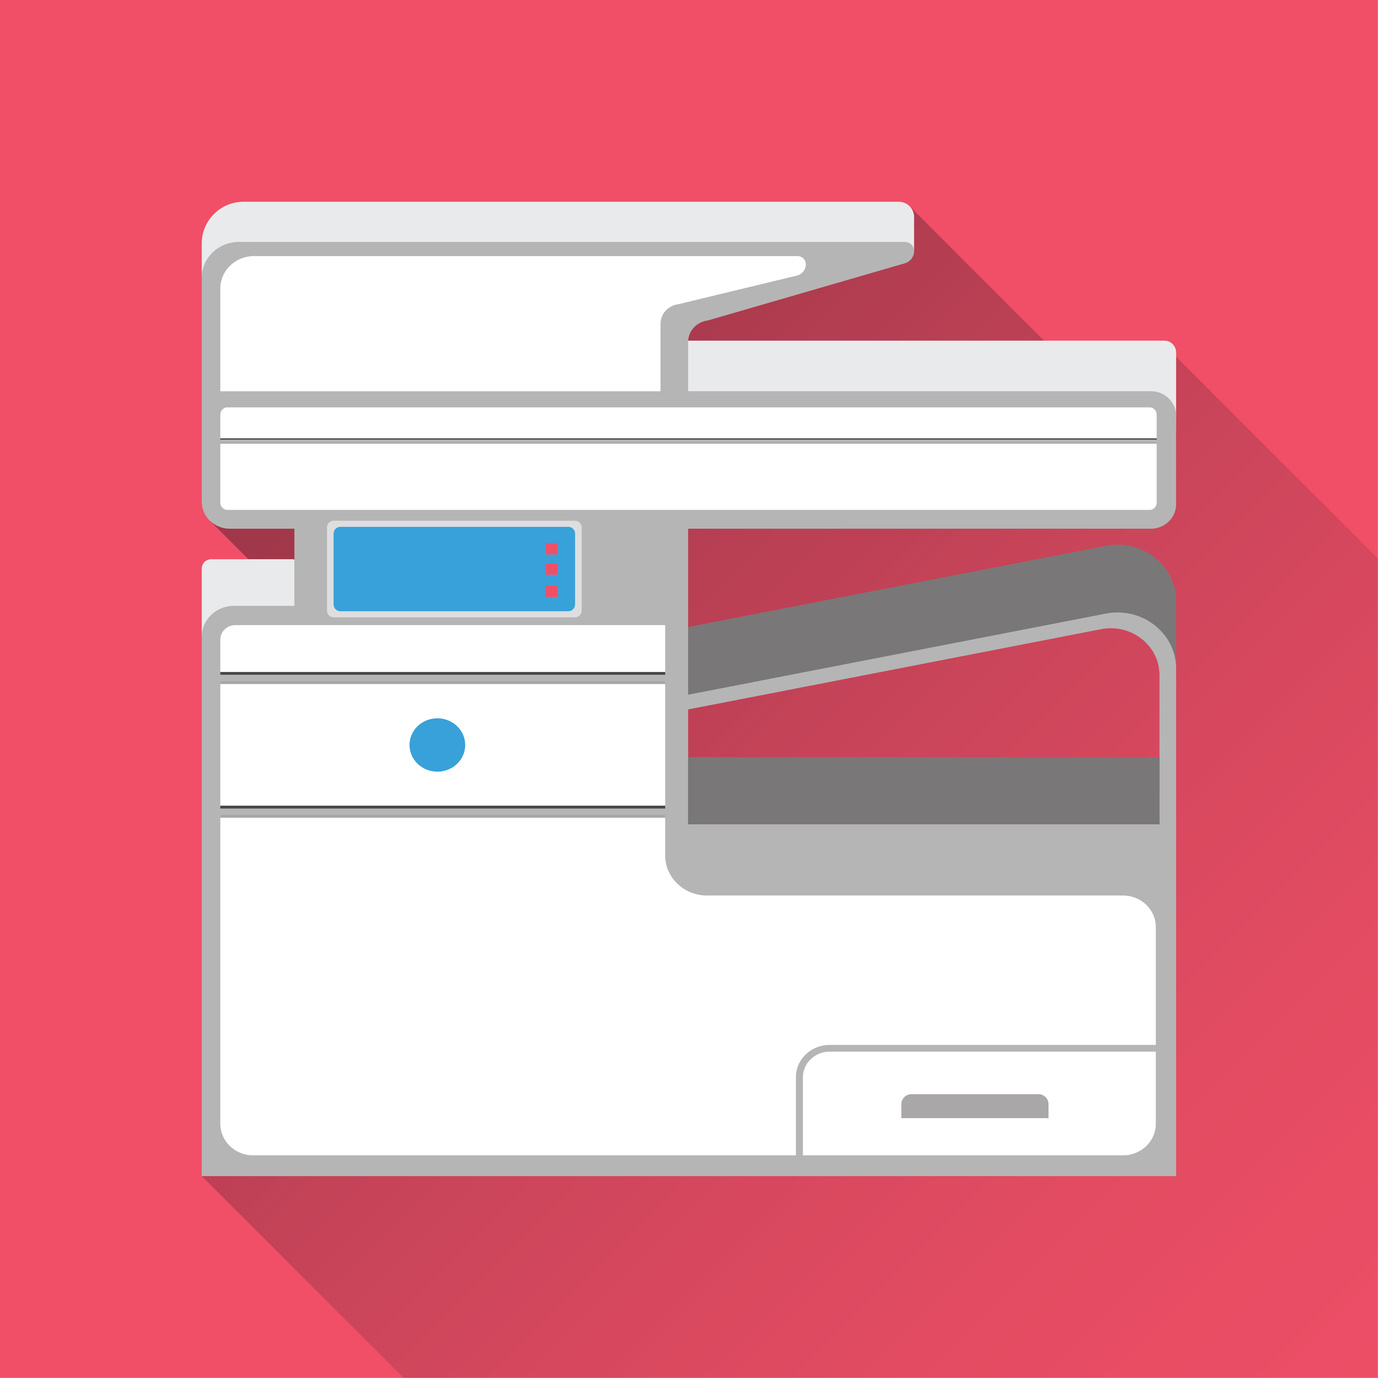 Digital Vs Analogue Copier – Know The Difference Before You Buy